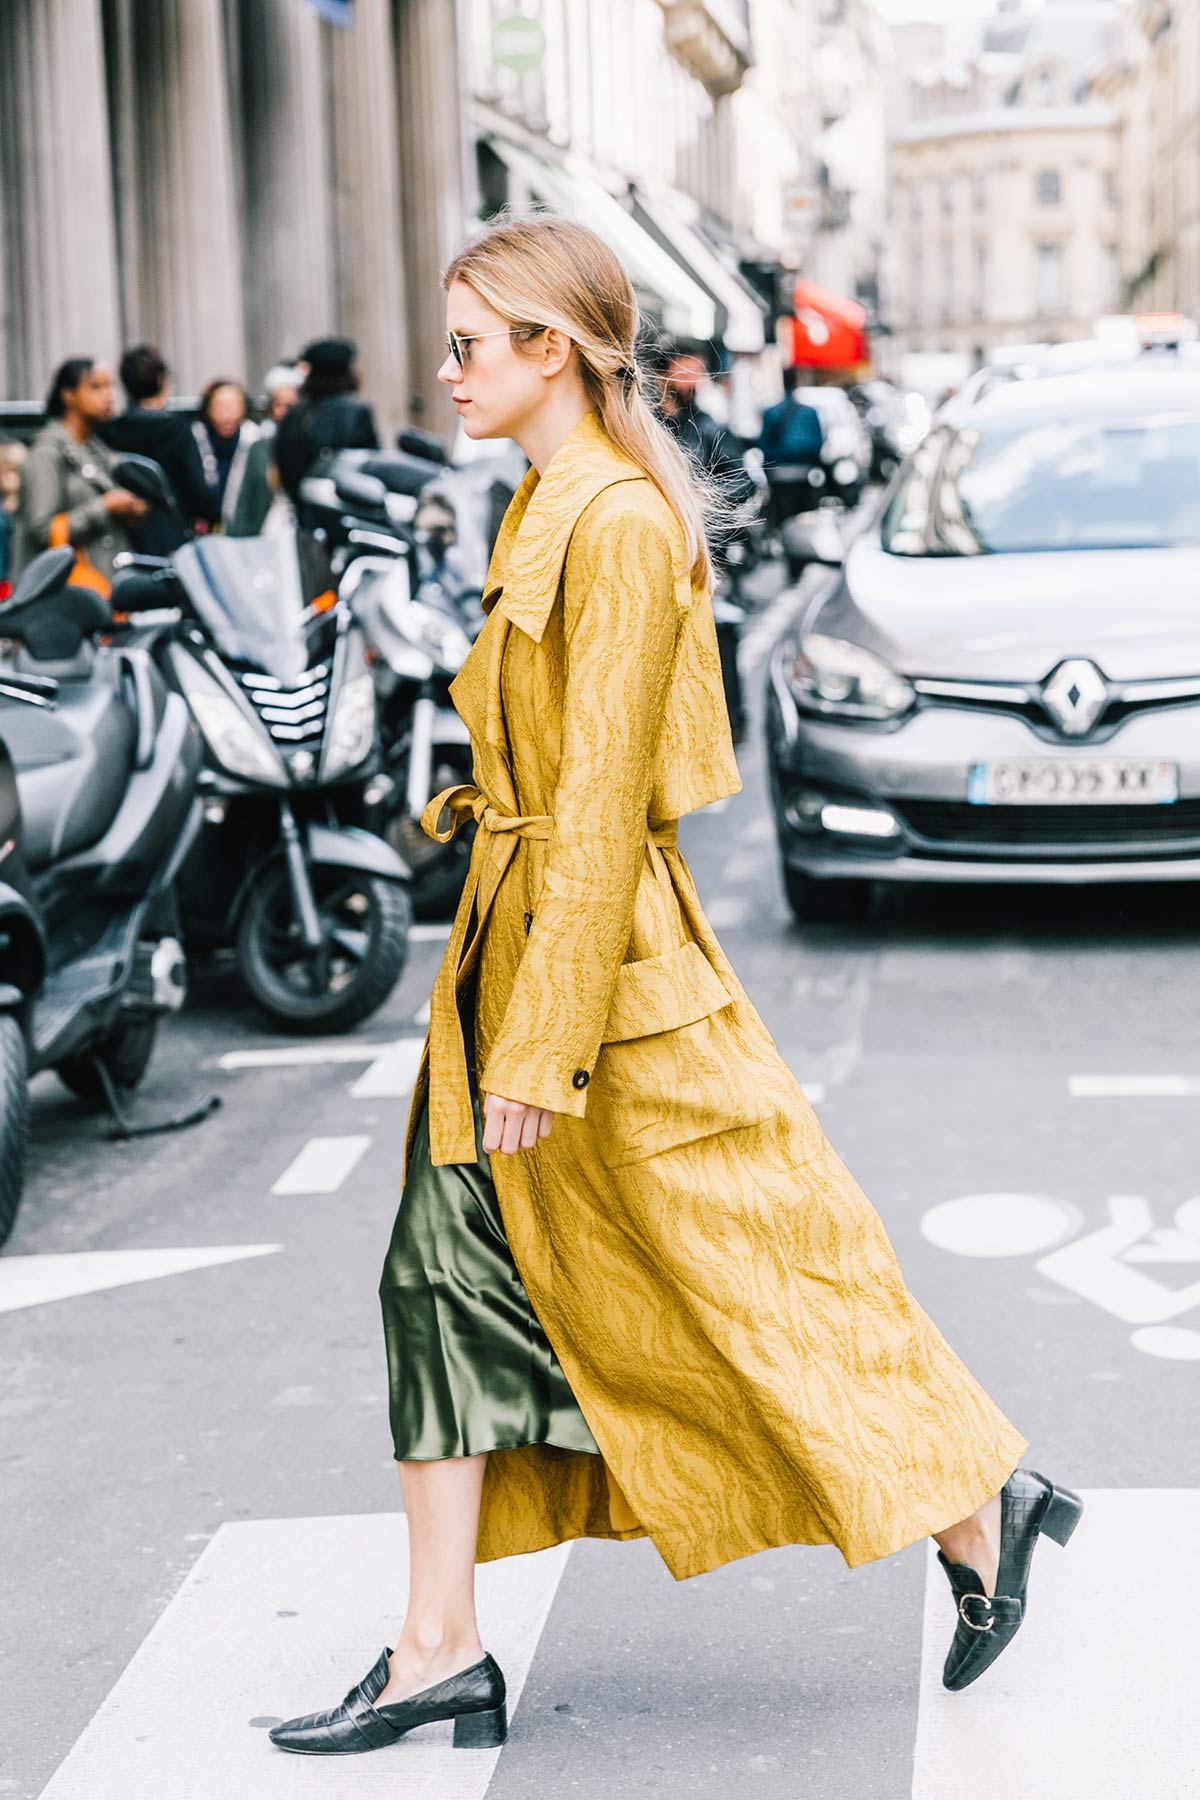 The Edit | Style Inspiration: Chic Fall Essentials for La Rentrée